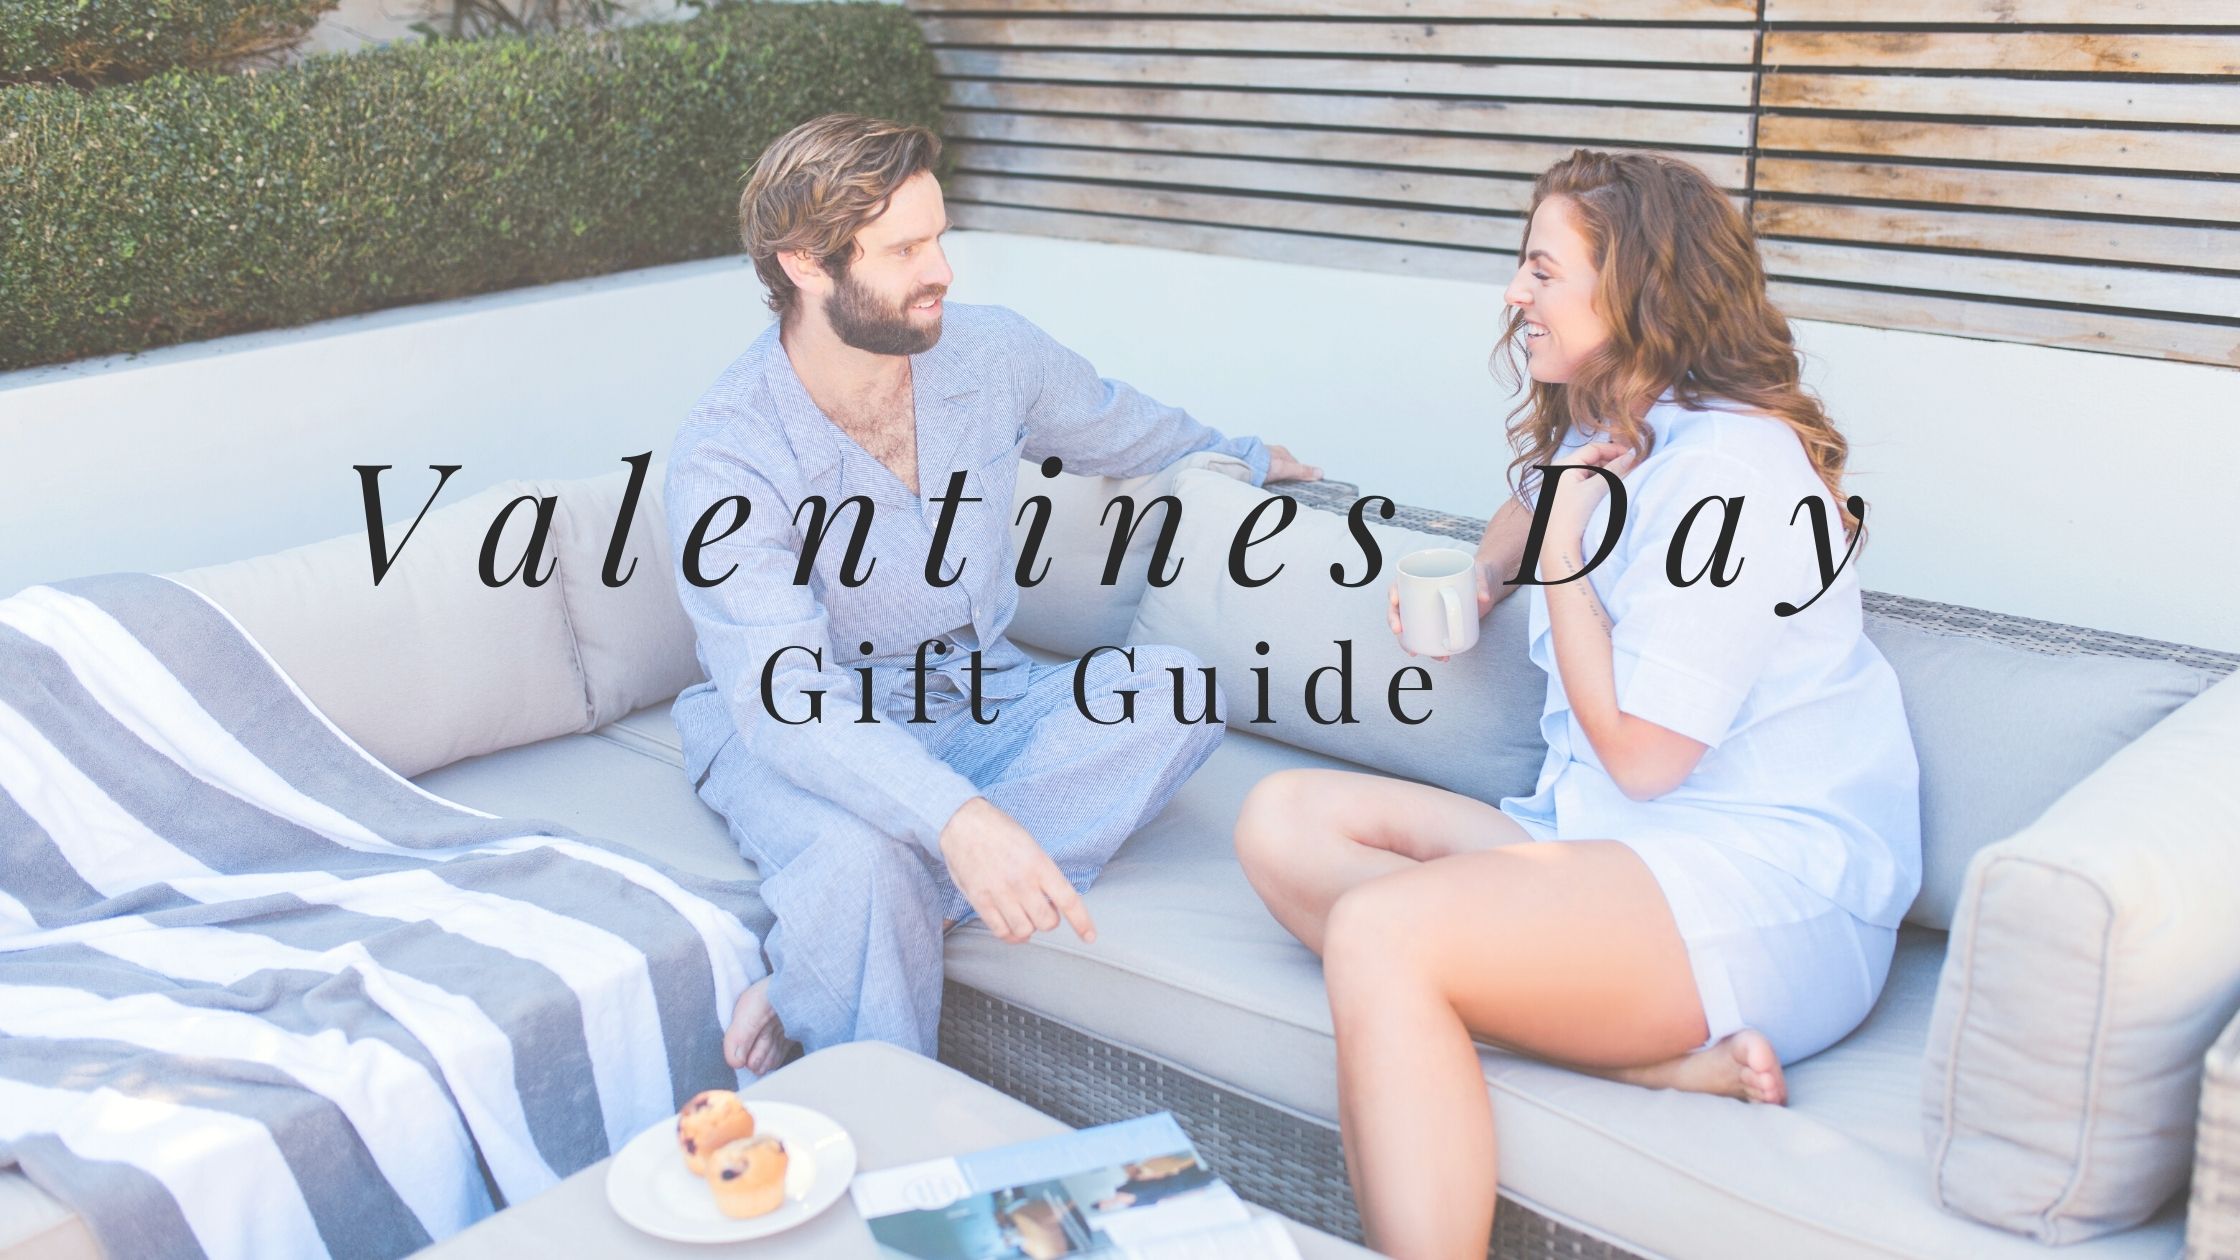 Valentines Day Gift Guide 2021 